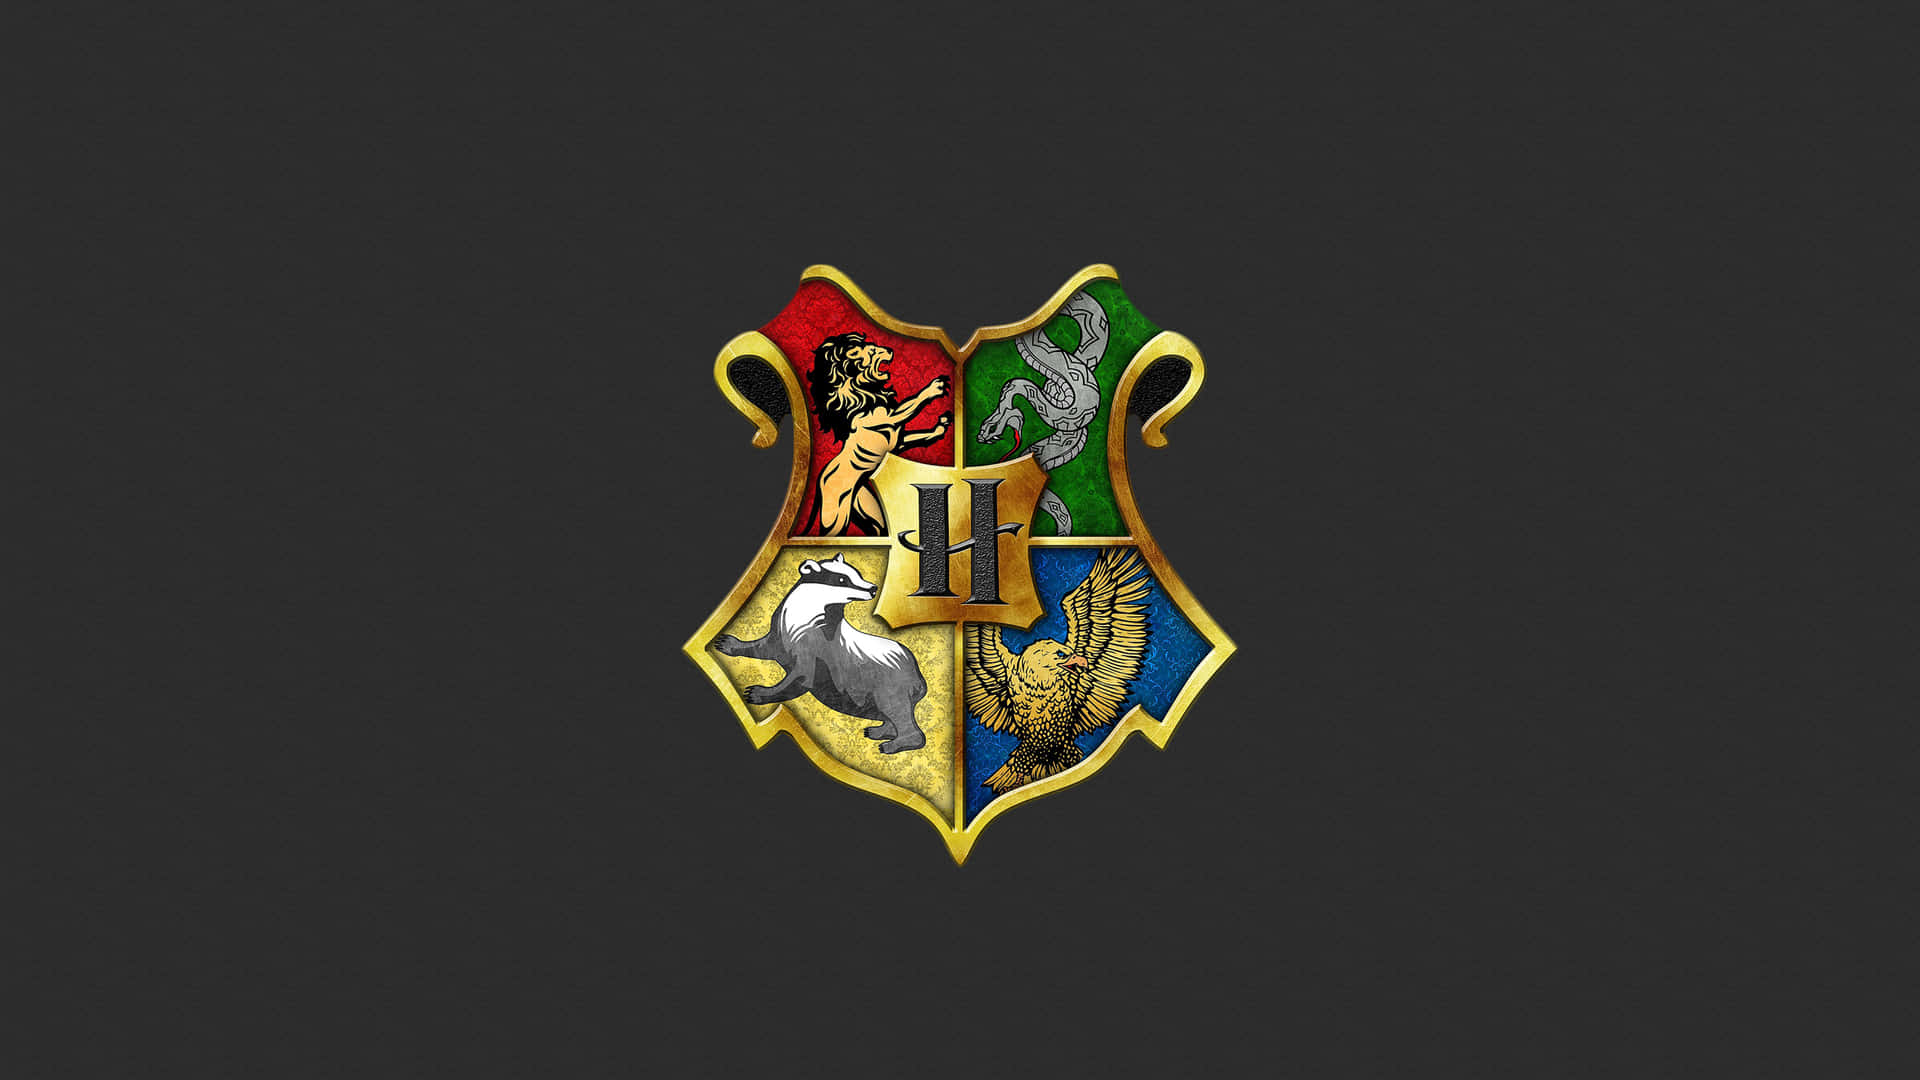 Representing brave, creative Ravenclaw house in the Wizarding World of Harry Potter Wallpaper